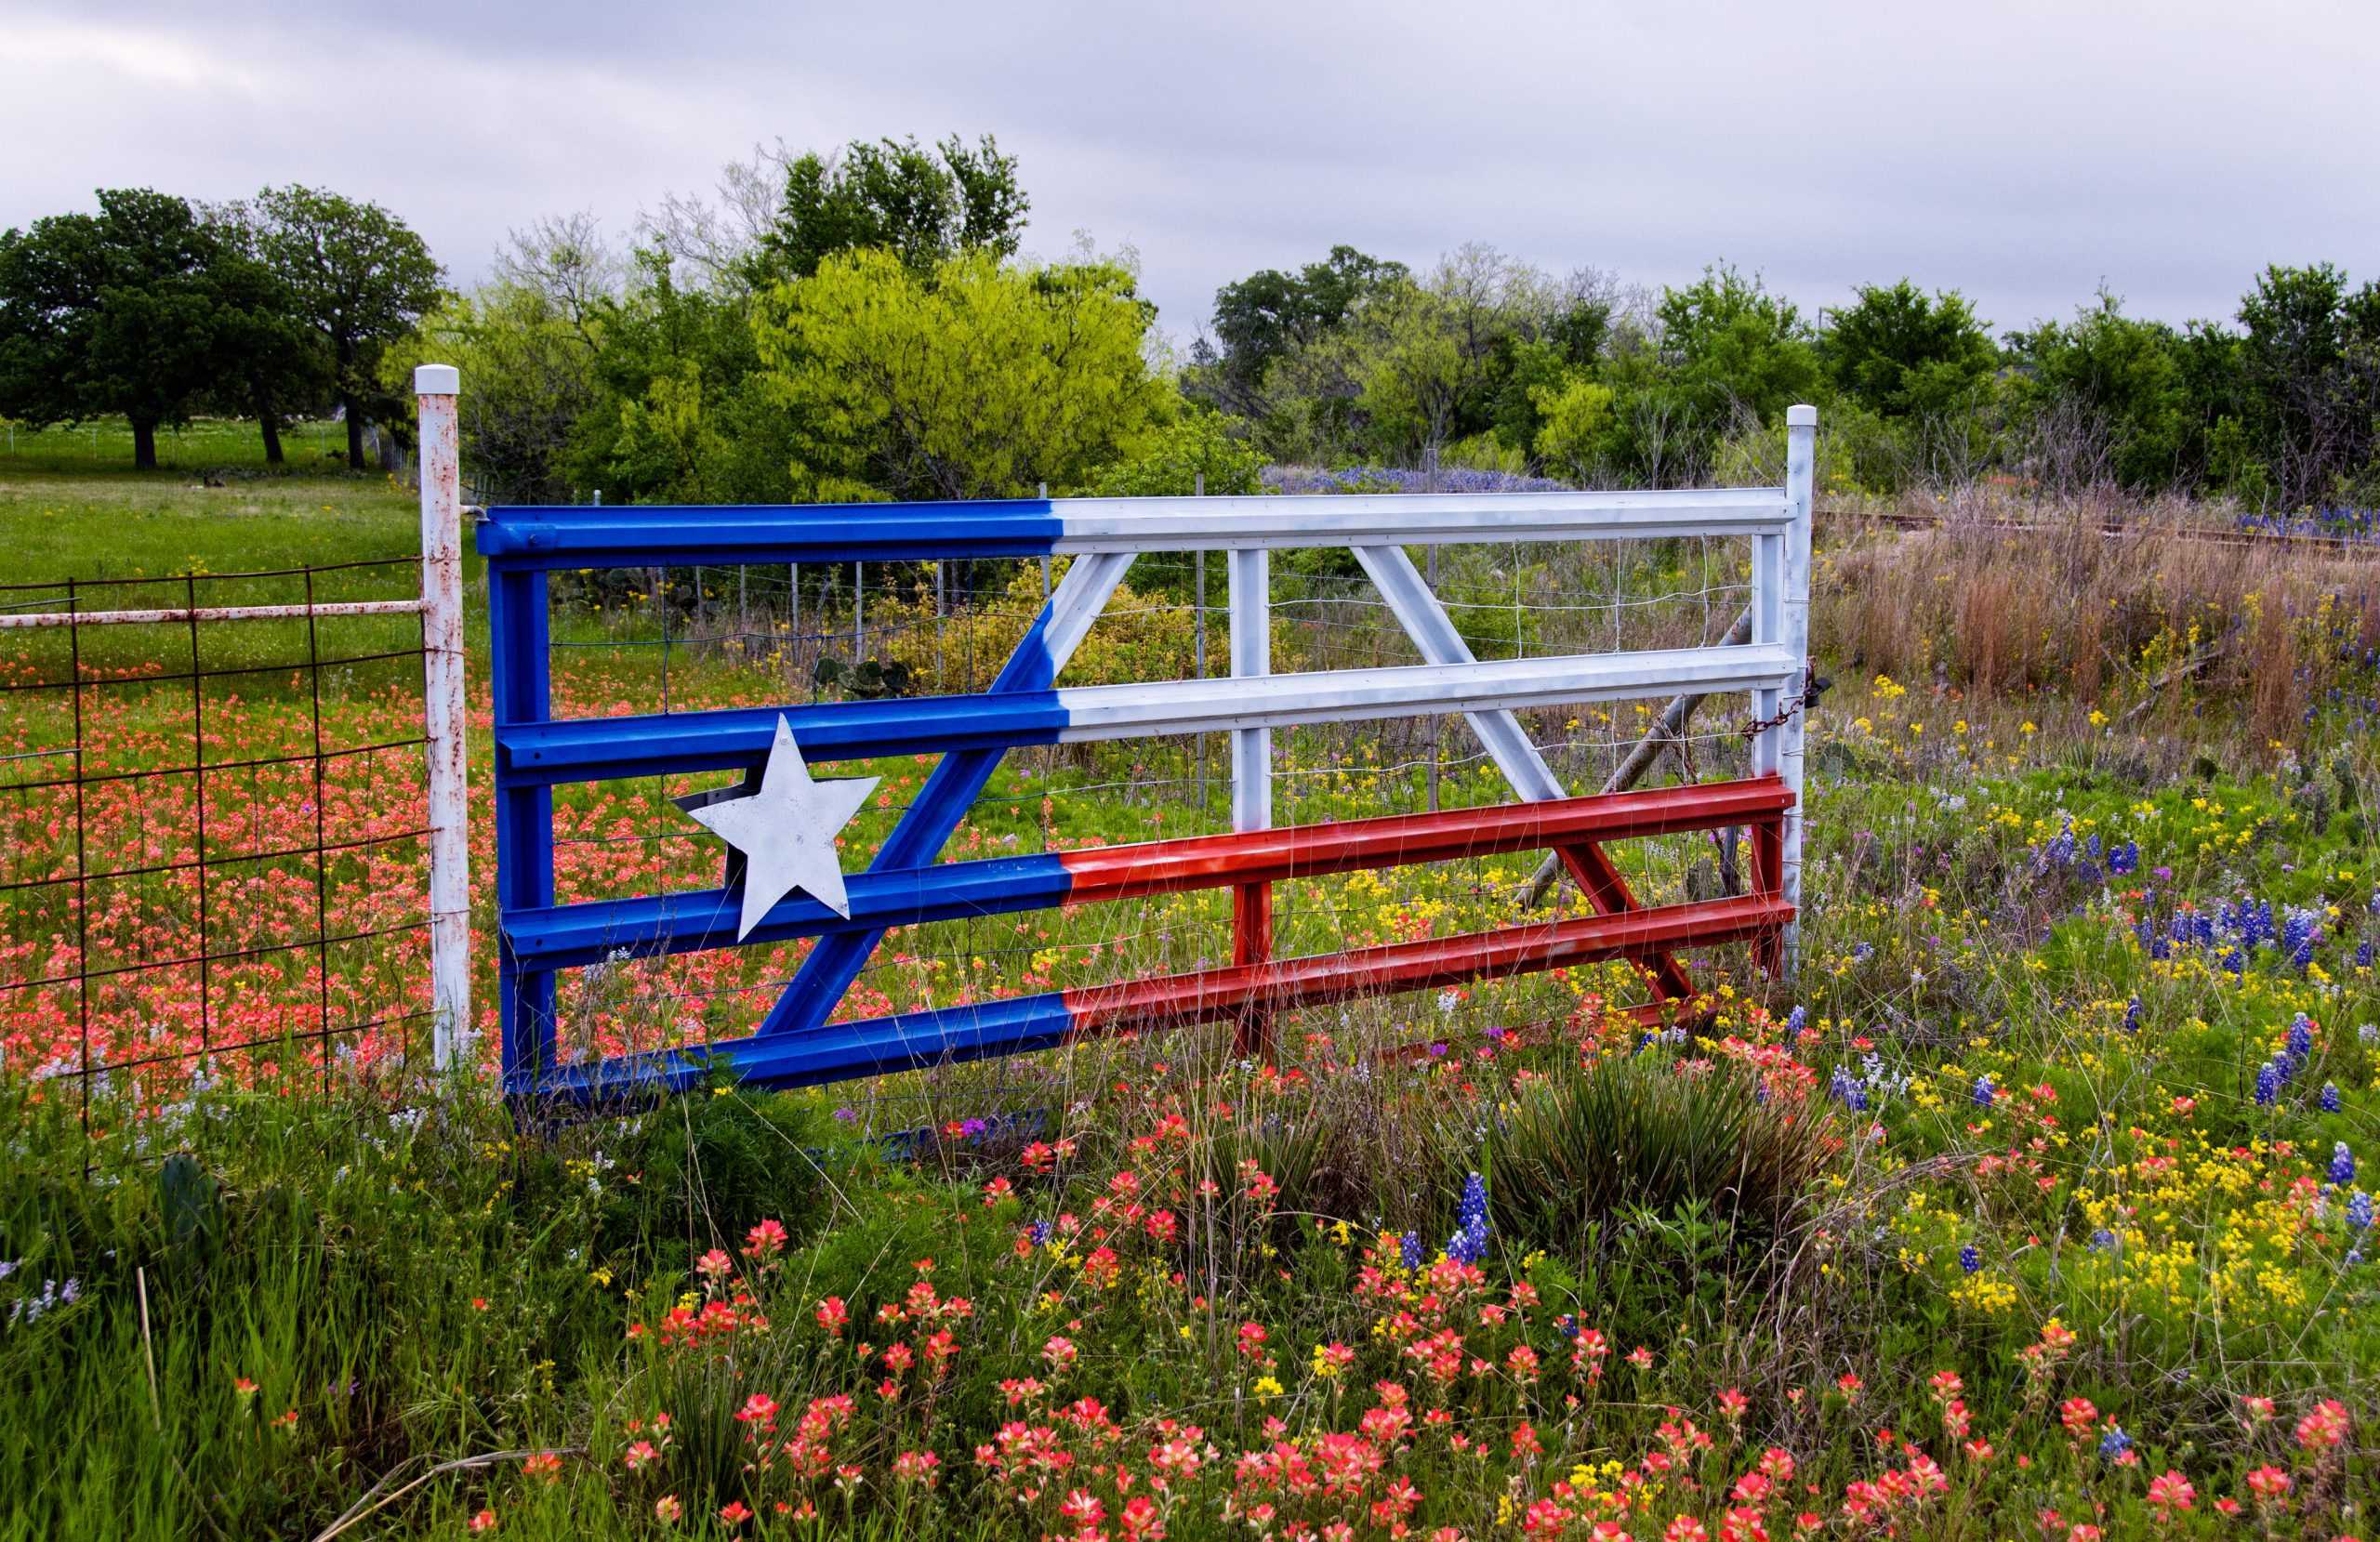 Gate painted in the Texas state flag colors